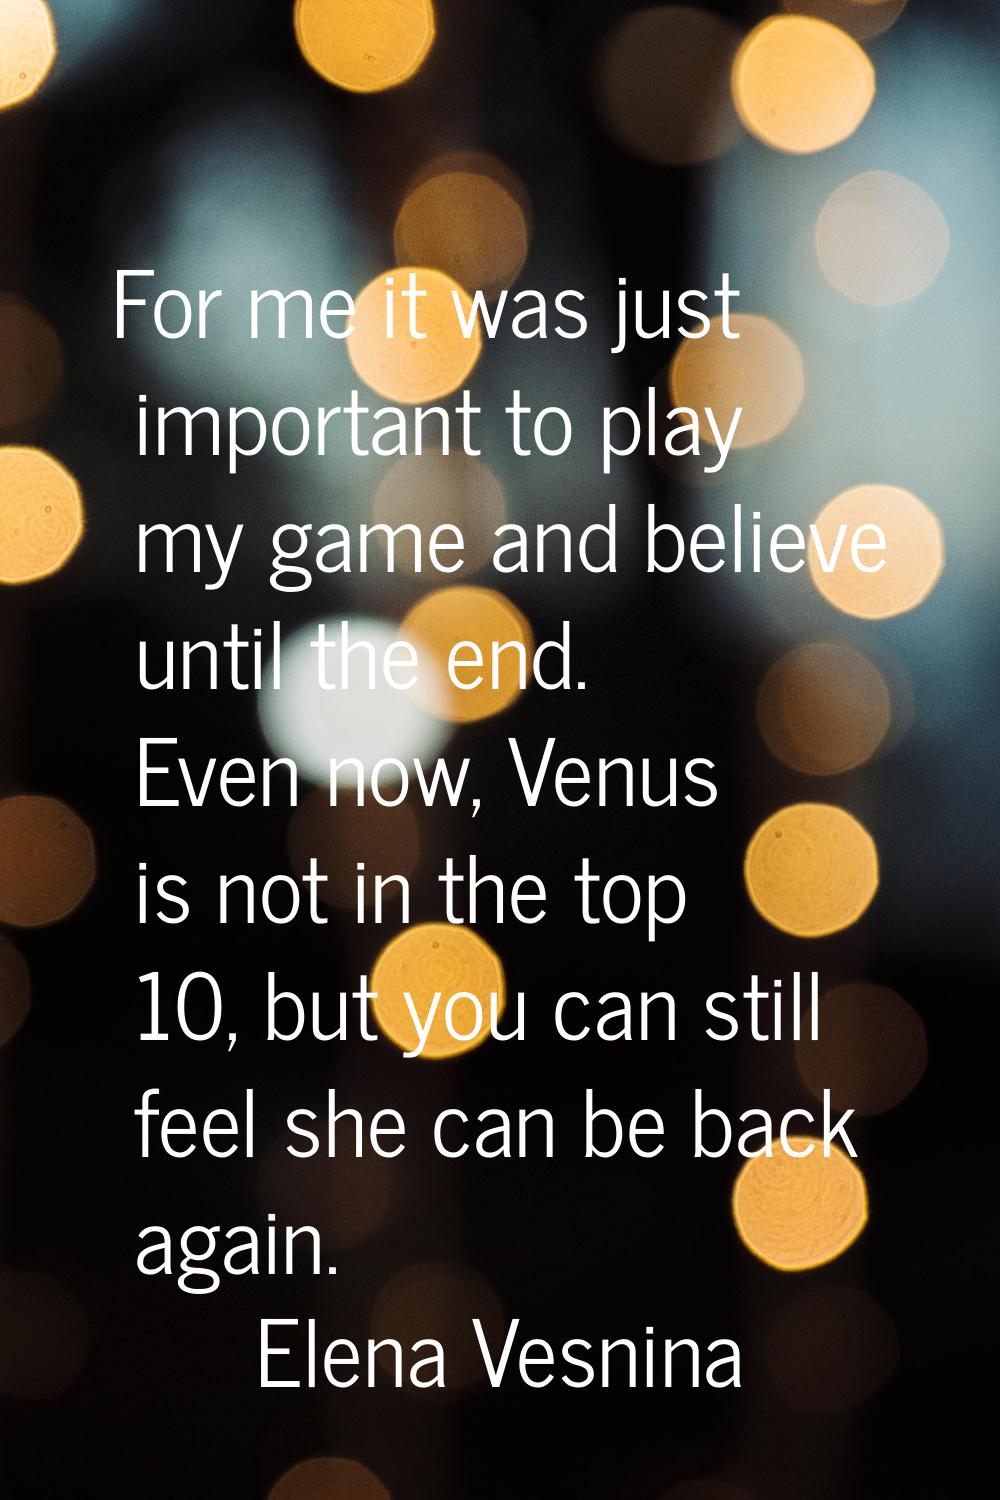 For me it was just important to play my game and believe until the end. Even now, Venus is not in t